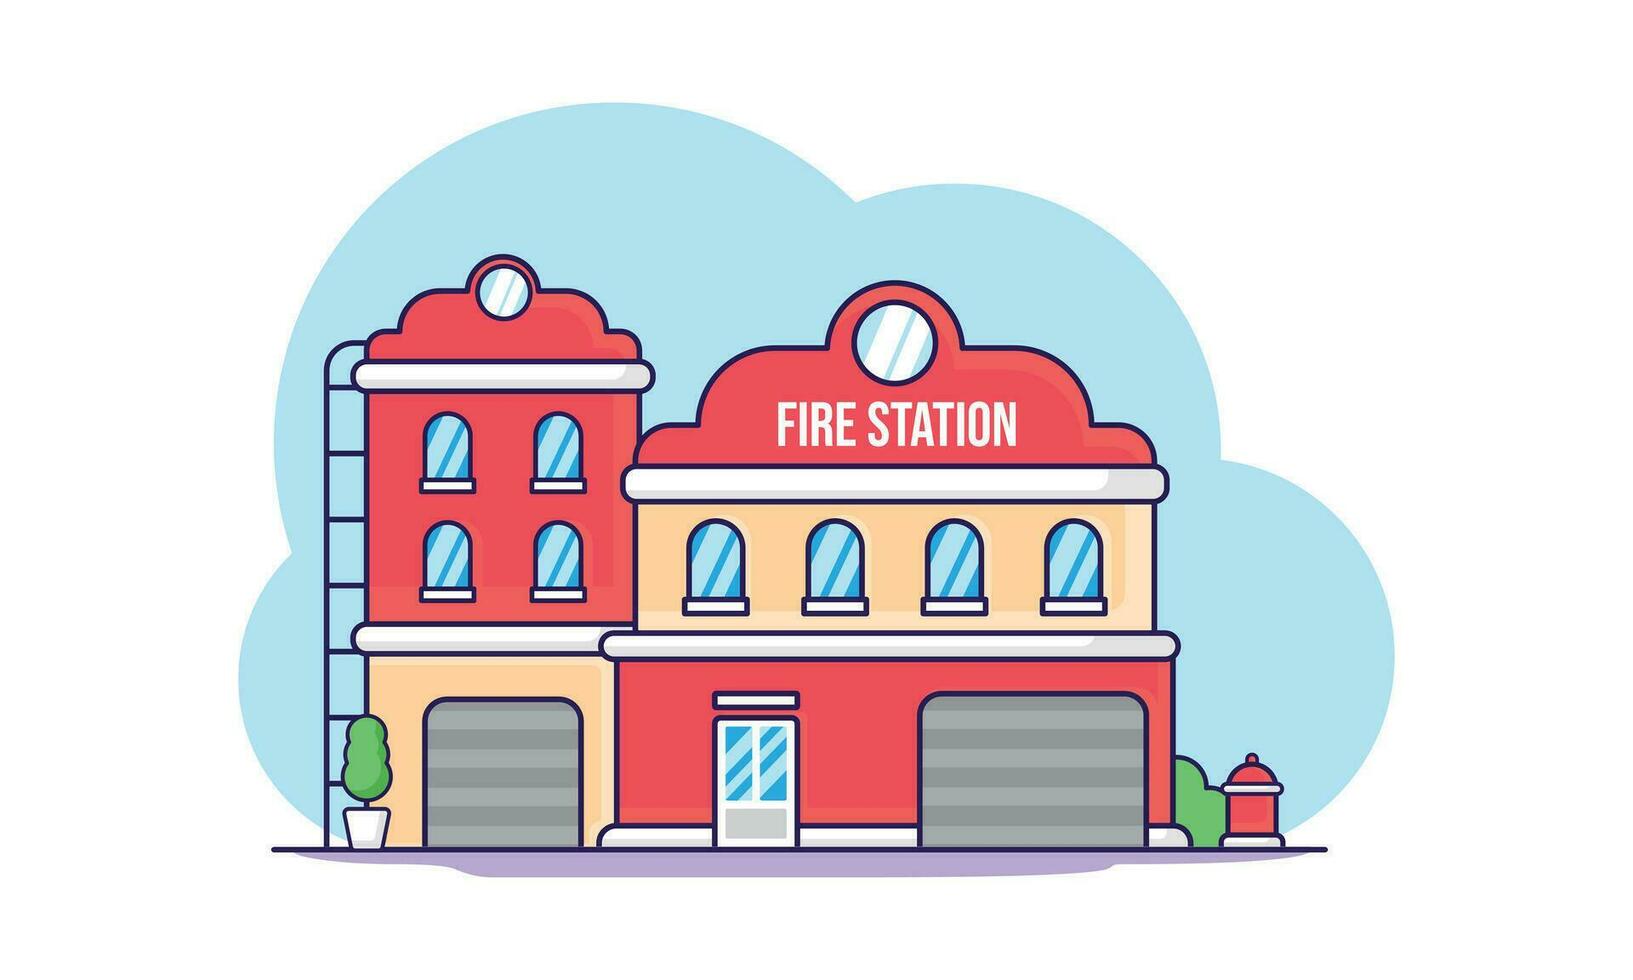 Illustration vector graphic design of Fire Station, department office government with cartoon style or flat design style  and children friendly, good for web design, children books, cartoon, etc.